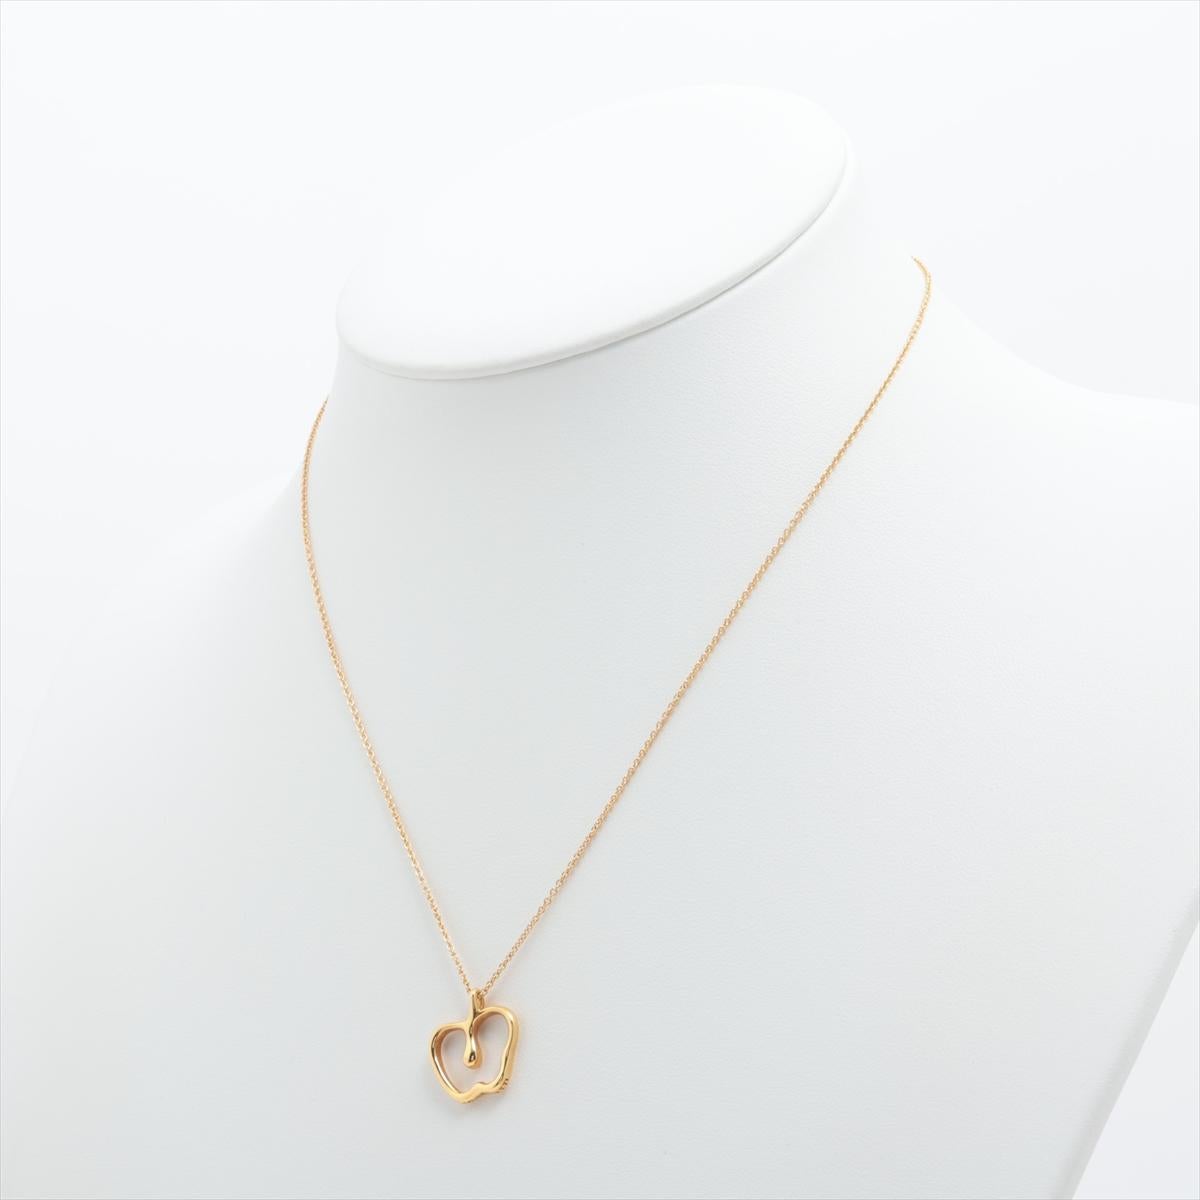 Brand : Tiffany&Co. 
Description: Tiffany Apple Necklace 
Metal Type:  750YG/ Yellow Gold
Total Weight:  3.9g
Condition: Preowned; small signs of wearing
Box -   Not Included
Papers -  Not Included
